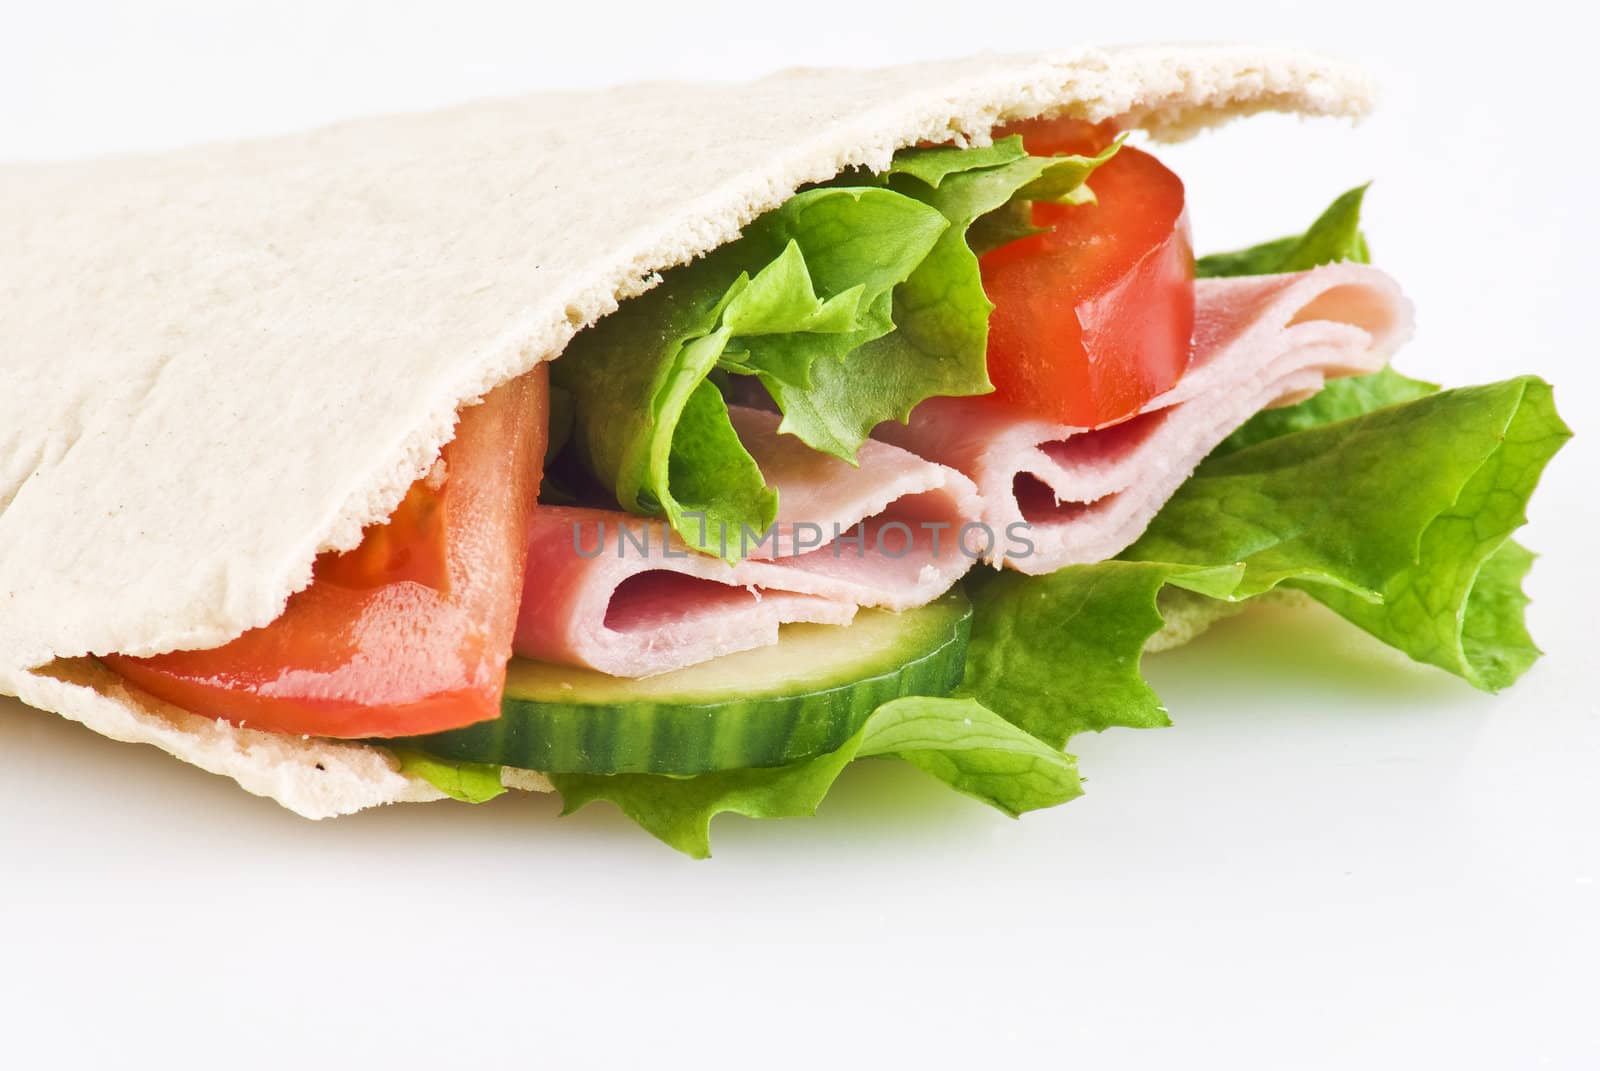 Pitta bread pocket filled with salad tomato cucumber and ham